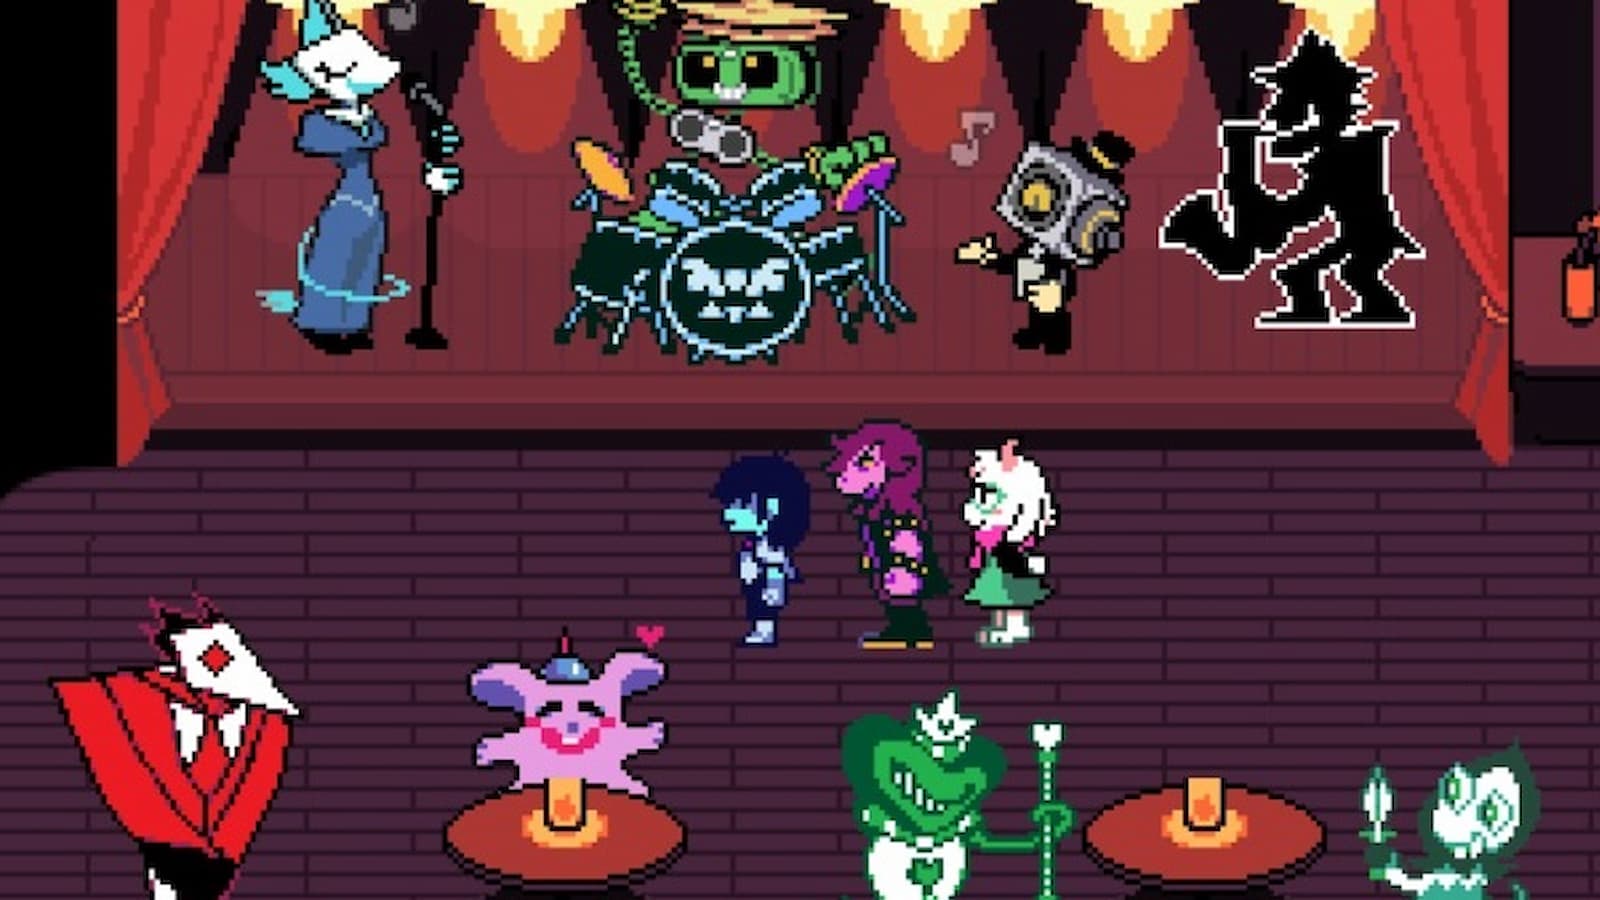 Deltarune isn't in the Undertale world, will take a while to finish